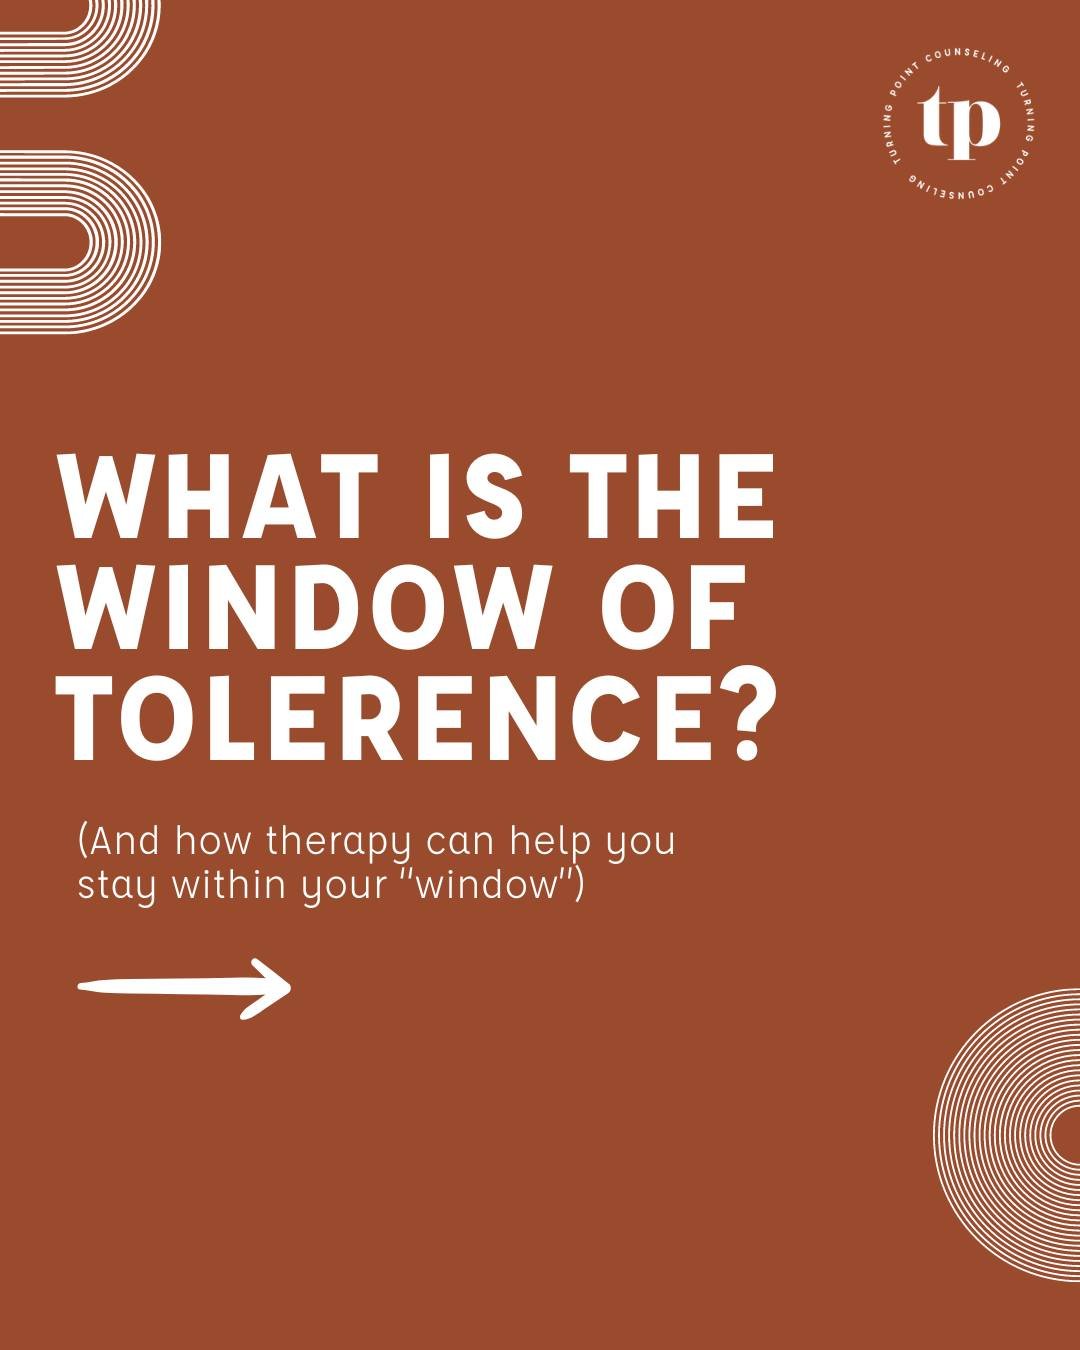 Have you ever heard of the phrase &quot;window of tolerance&quot;

Believe it or not, it's not looking out of a window...

Swipe to learn more. 

The &quot;window of tolerance&quot; is a concept often used in therapy to describe when an individual is